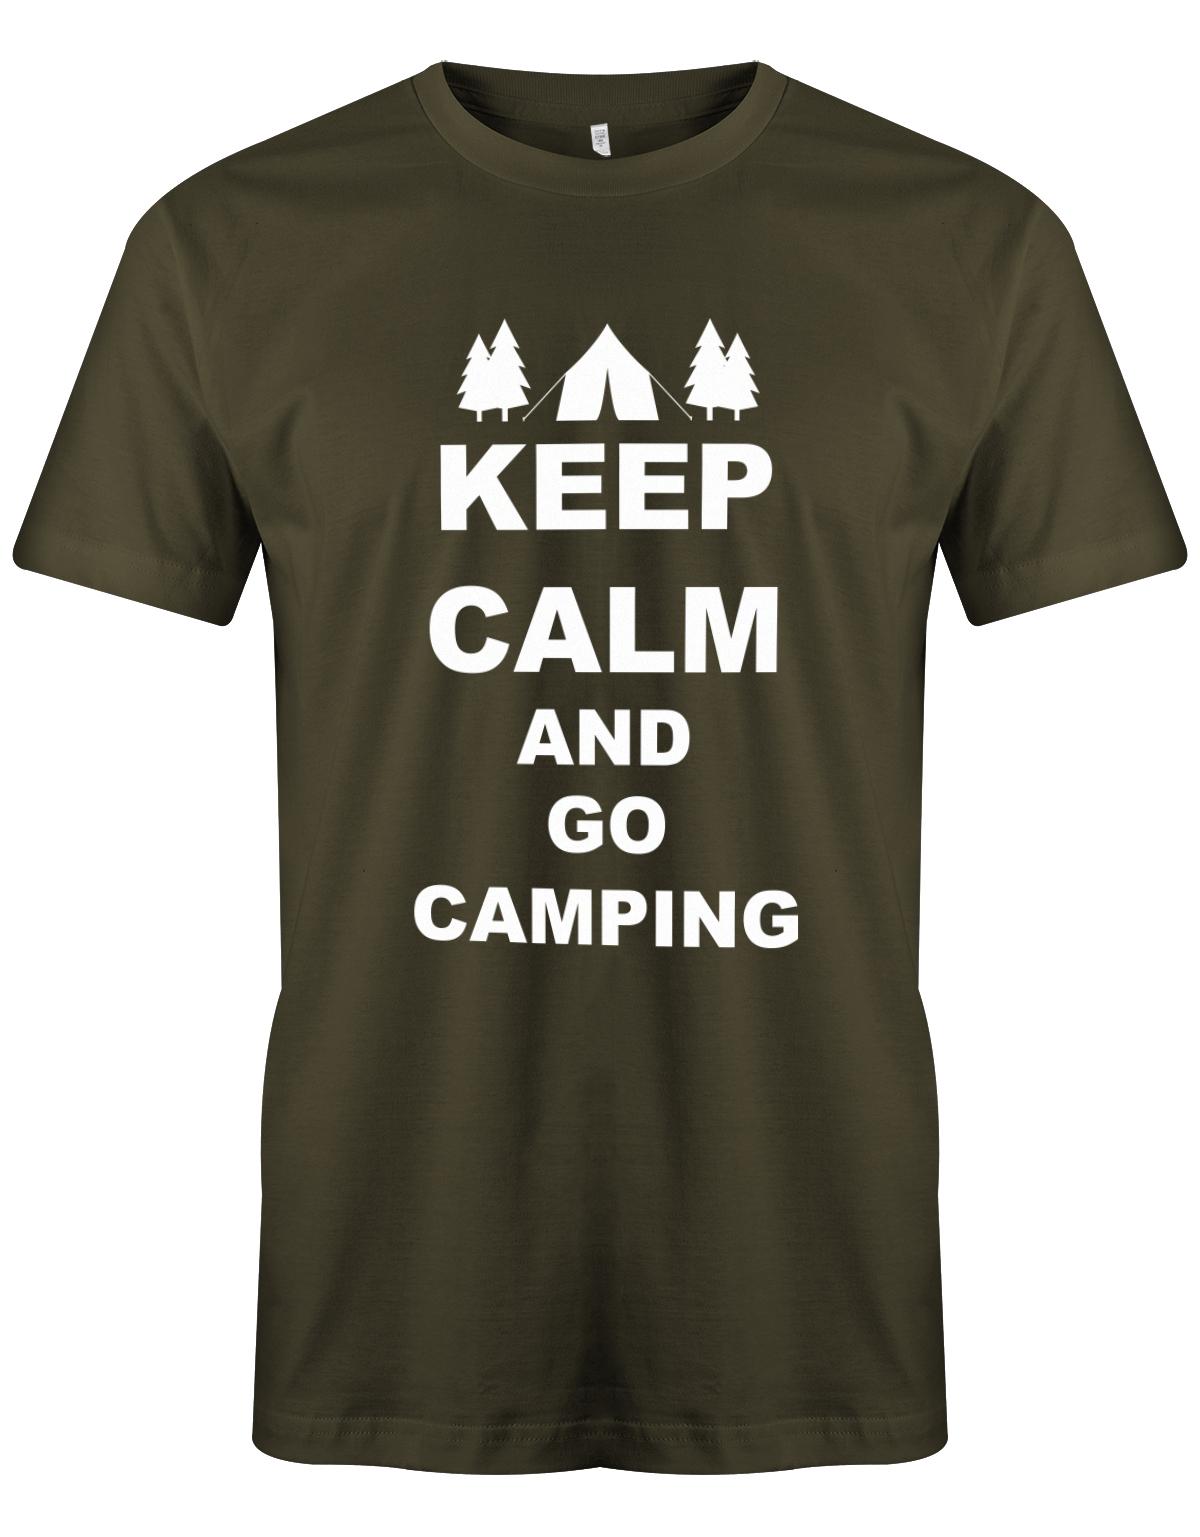 Keep-Calm-and-Go-Camping-Herren-Shirt-army